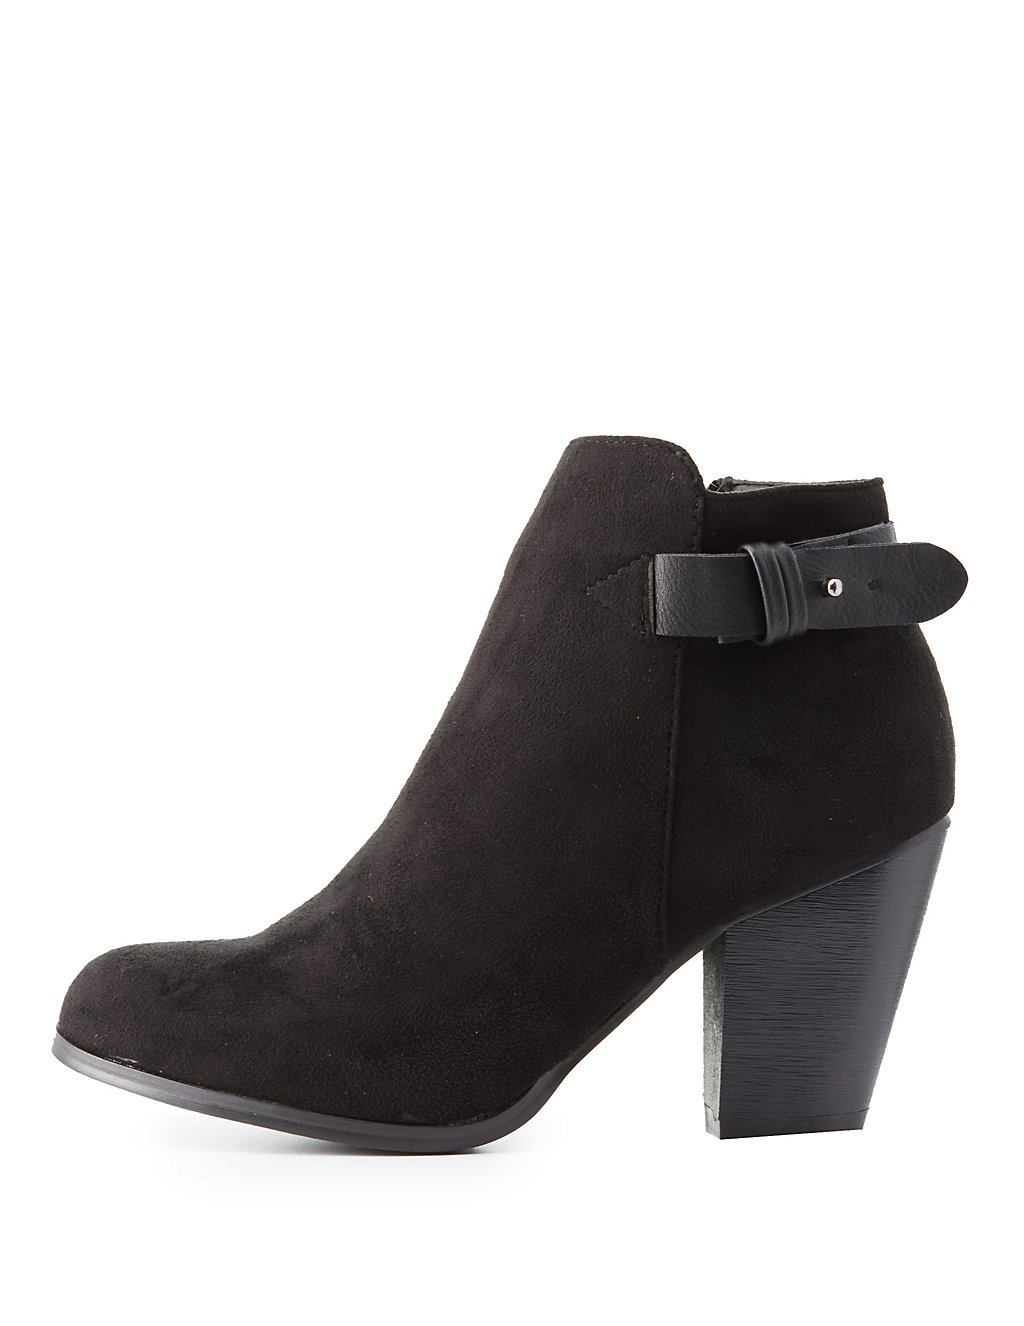 Boots and Booties for Women | Charlotte Russe